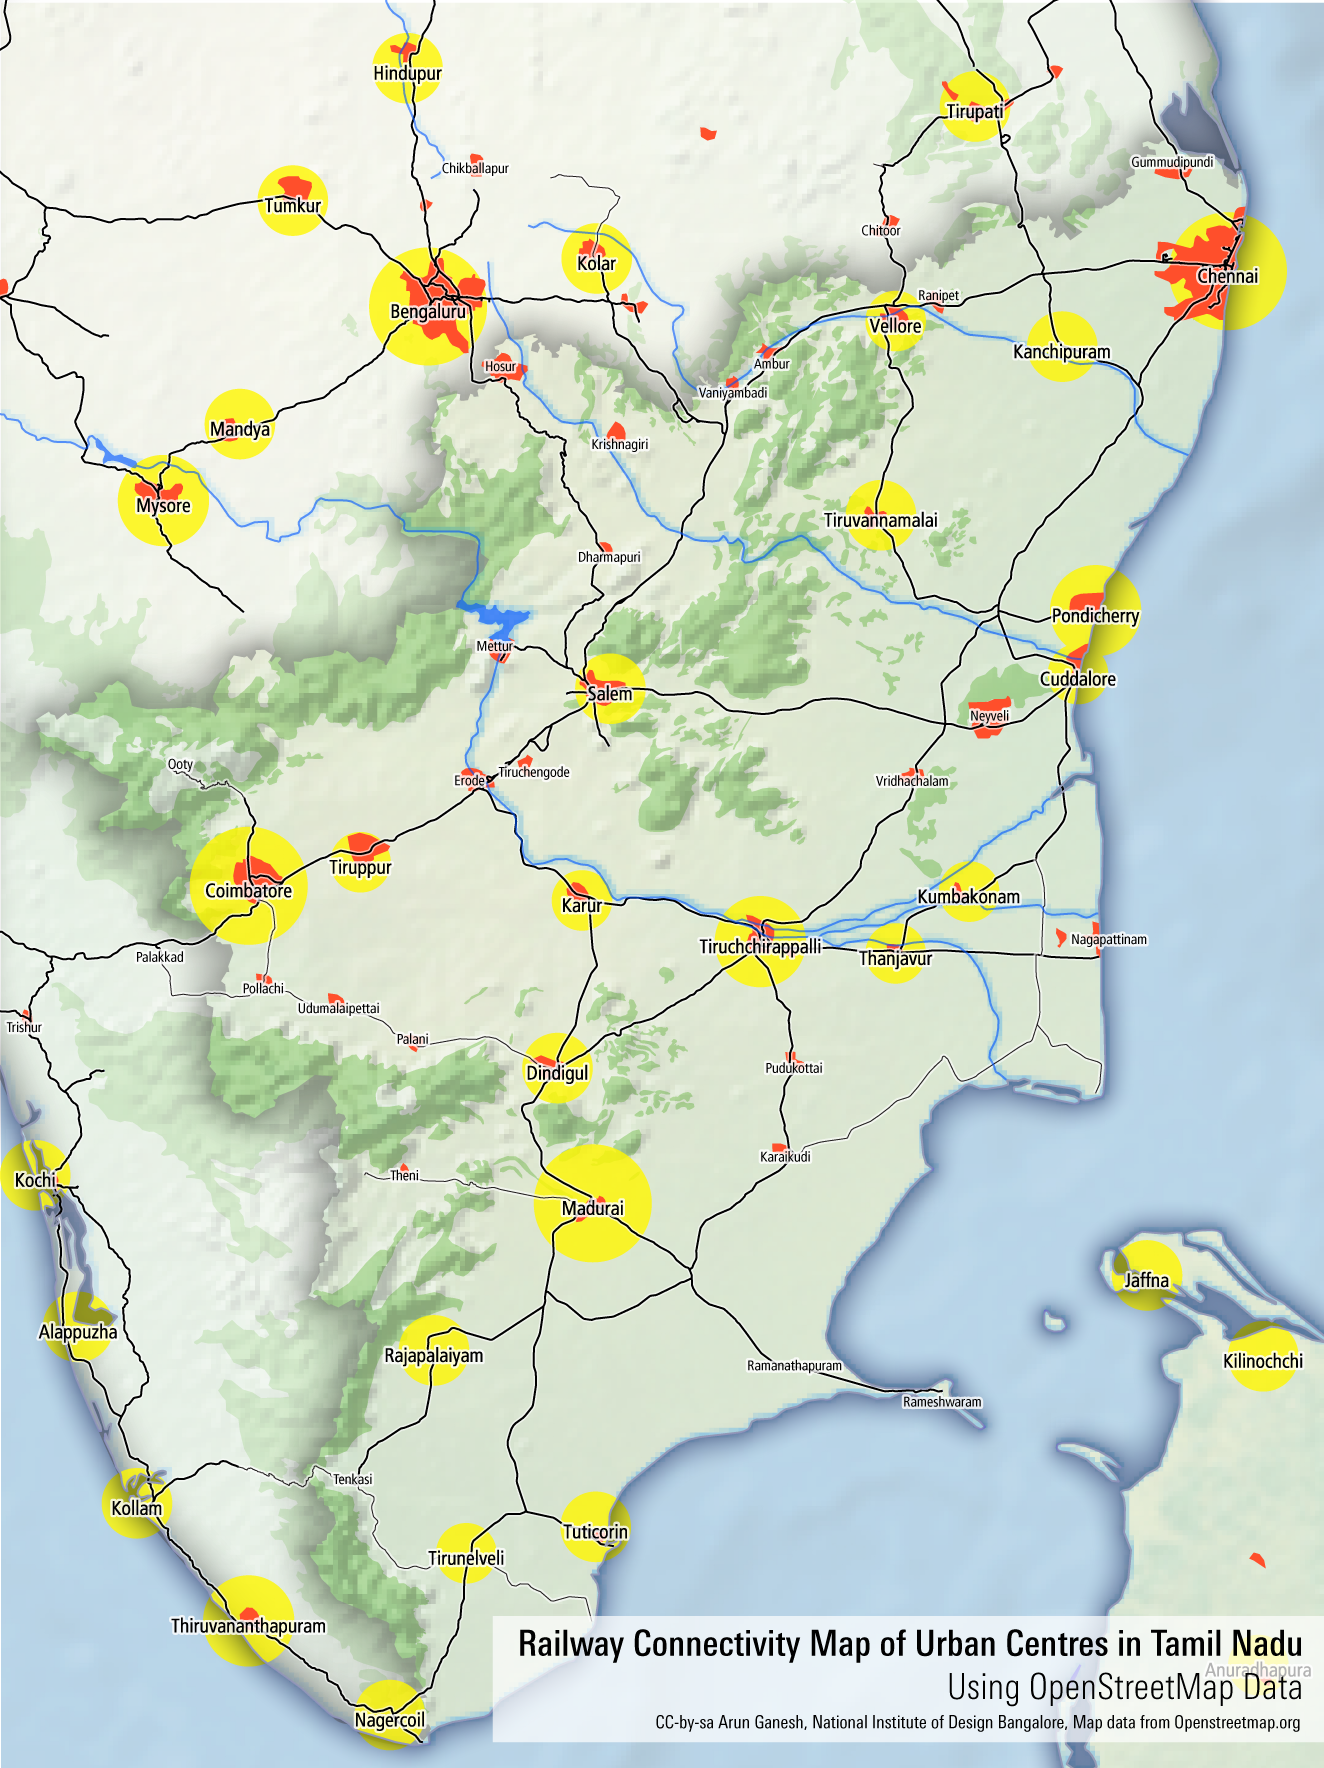 File:Tamil Nadu Urban Areas and Railway Connectivity Map (openstreetmap).png - Wikimedia Commons